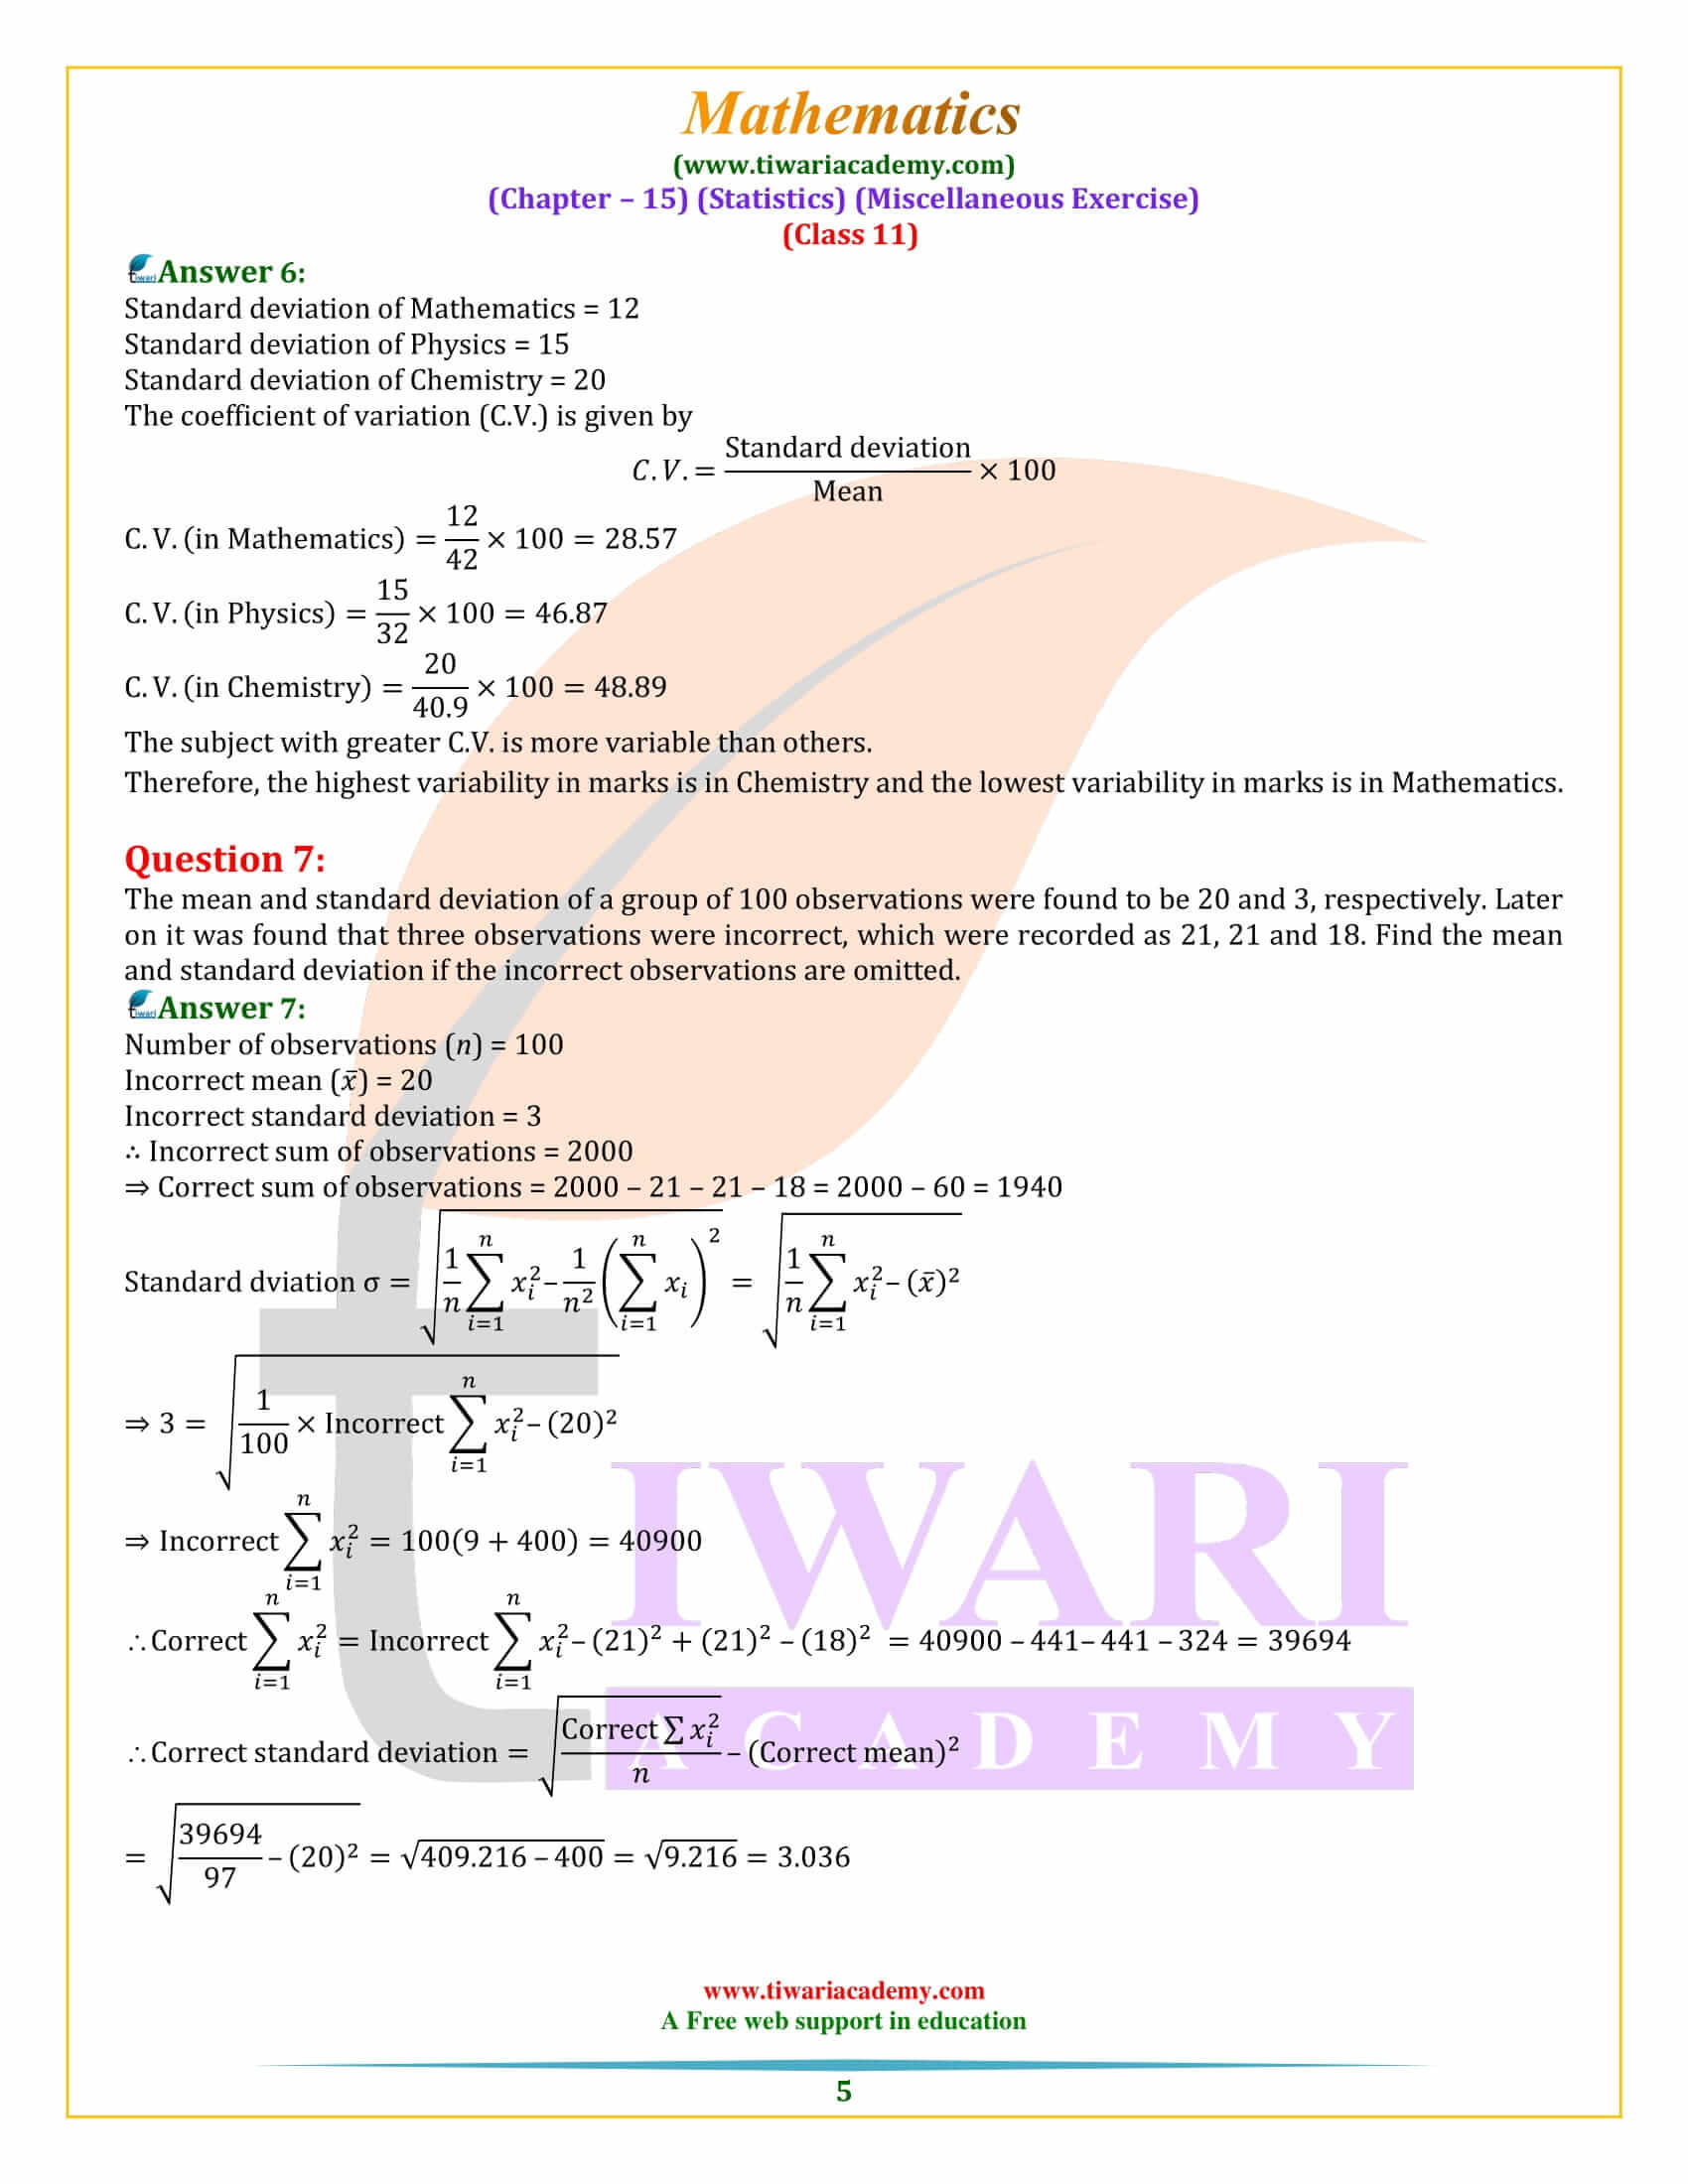 NCERT Solutions for Class 11 Maths Chapter 15 Miscellaneous Exercise free download